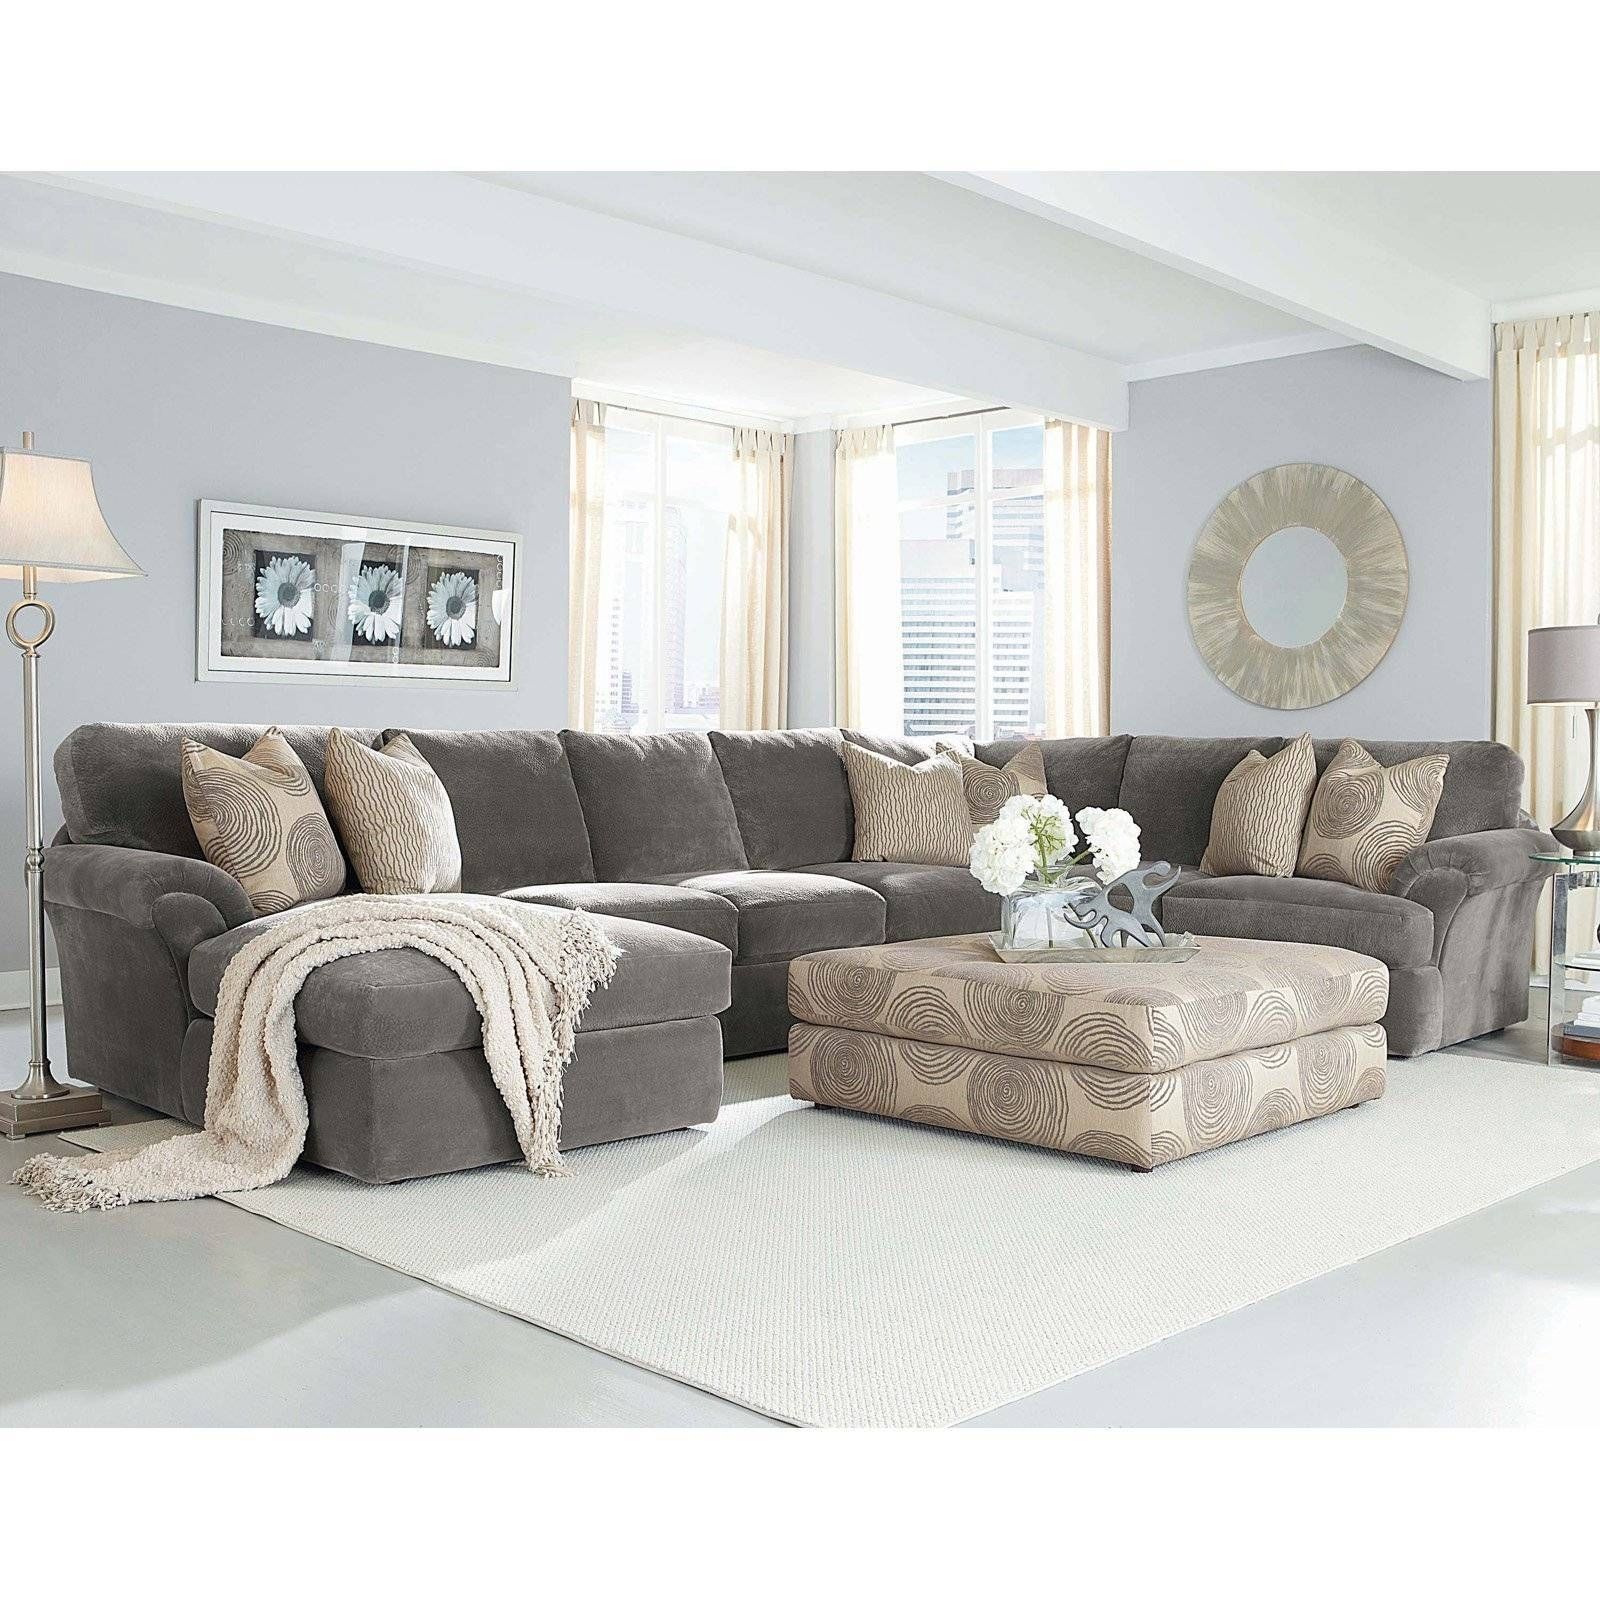 41+ Incredible Photos Of Grey Sectional Living Room Ideas Ideas Throughout Dark Grey Polyester Sofa Couches (Gallery 11 of 20)